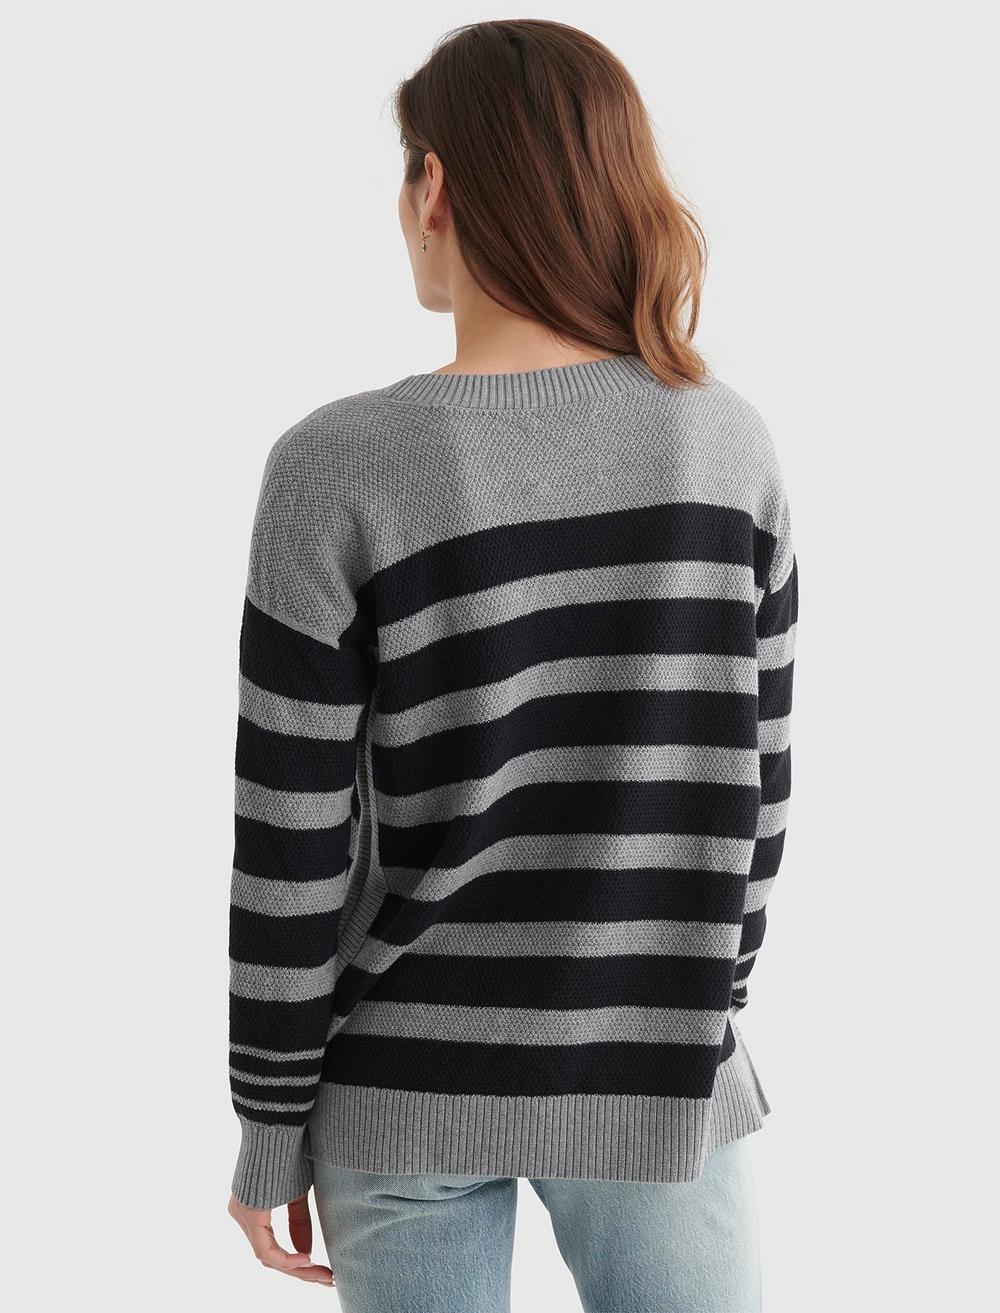 TEXTURED KNIT SWEATER, image 4